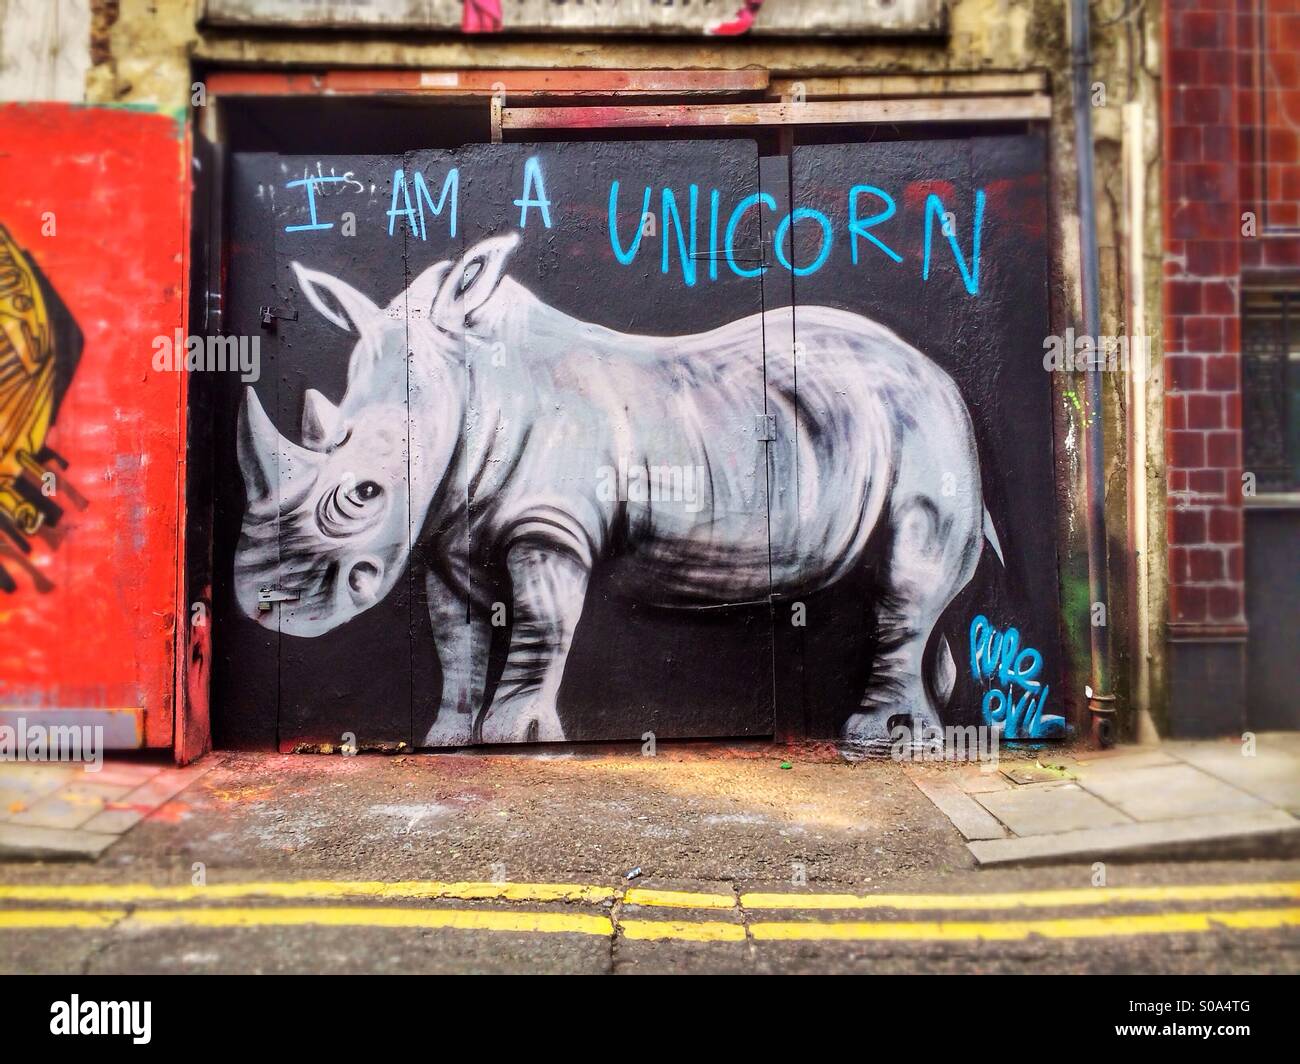 Graffiti By Street Artist Pure Evil Depicting A Rhino With The Slogan Stock Photo Alamy